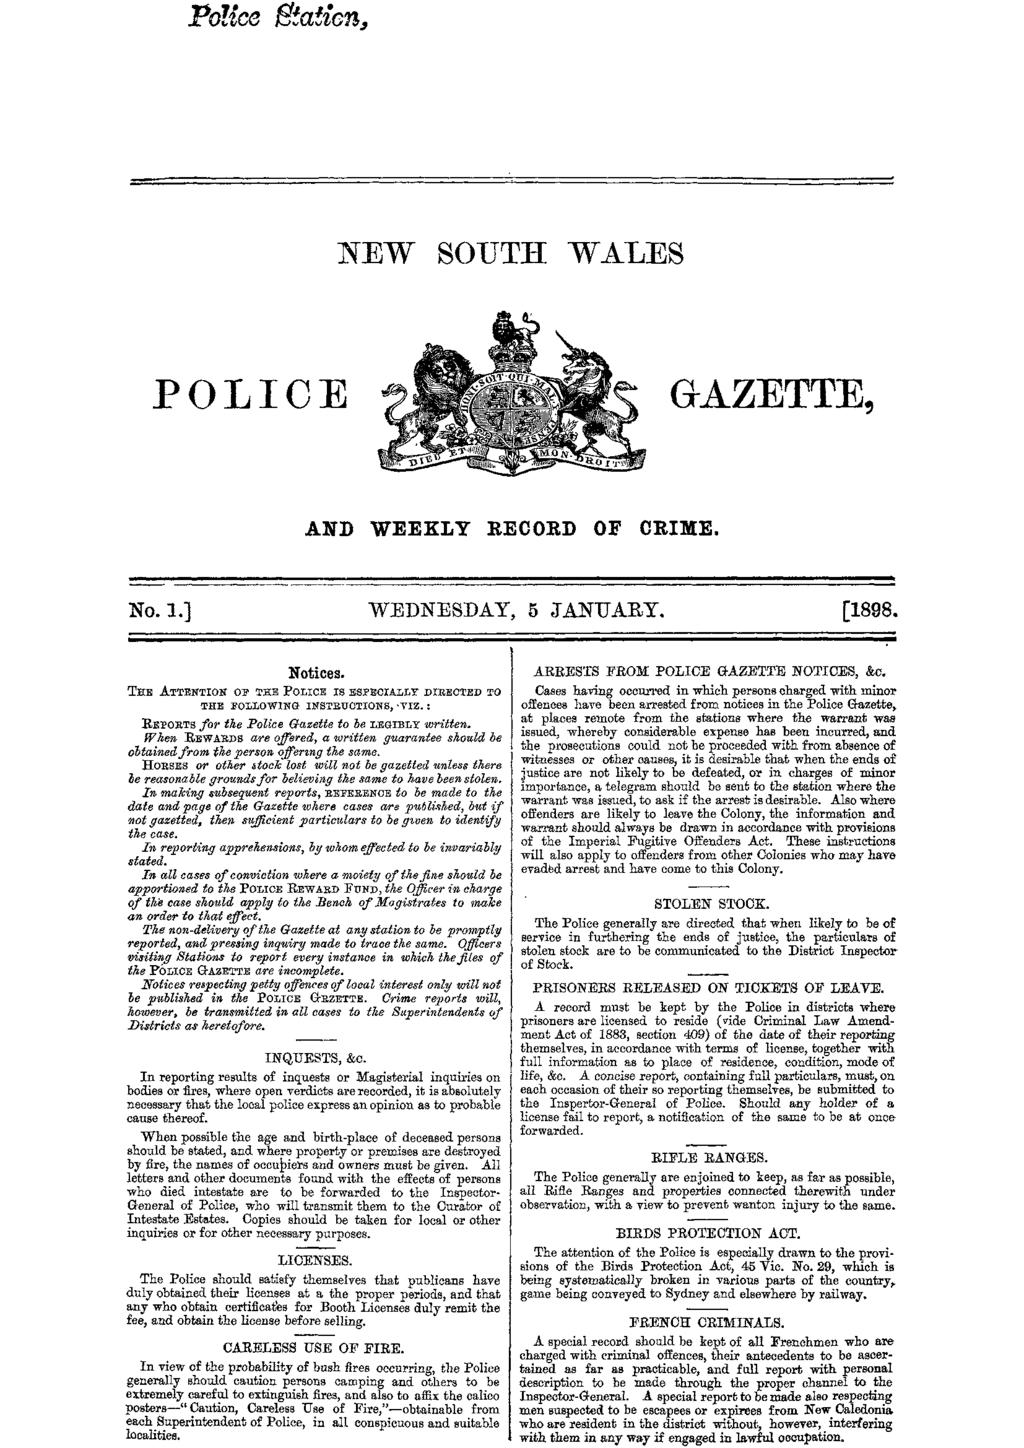 Pole aucn, NEW SOUTH WALES POLI C E GAZETTE, p.ni(/if/ _46MA N- irtor 17fj AND WEEKLY RECORD OF CRIME. No. 1.] WEDNESDAY, 5 JANUARY. [1898. Notices.